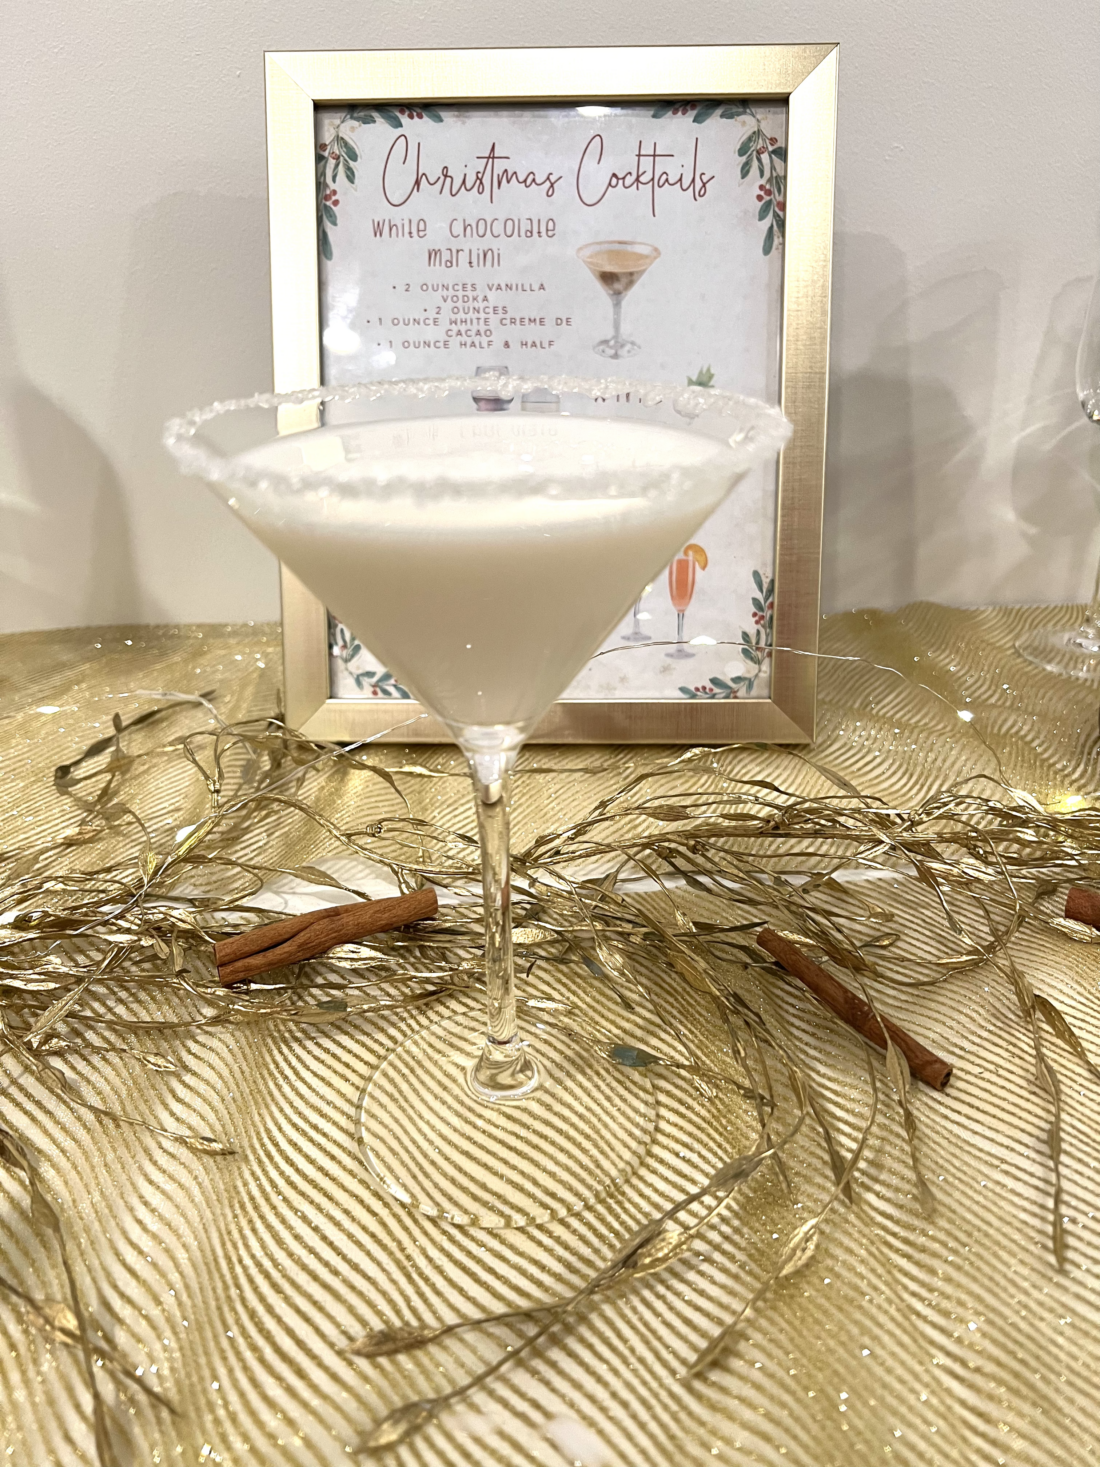 White Chocolate Martini is a holiday cocktail.